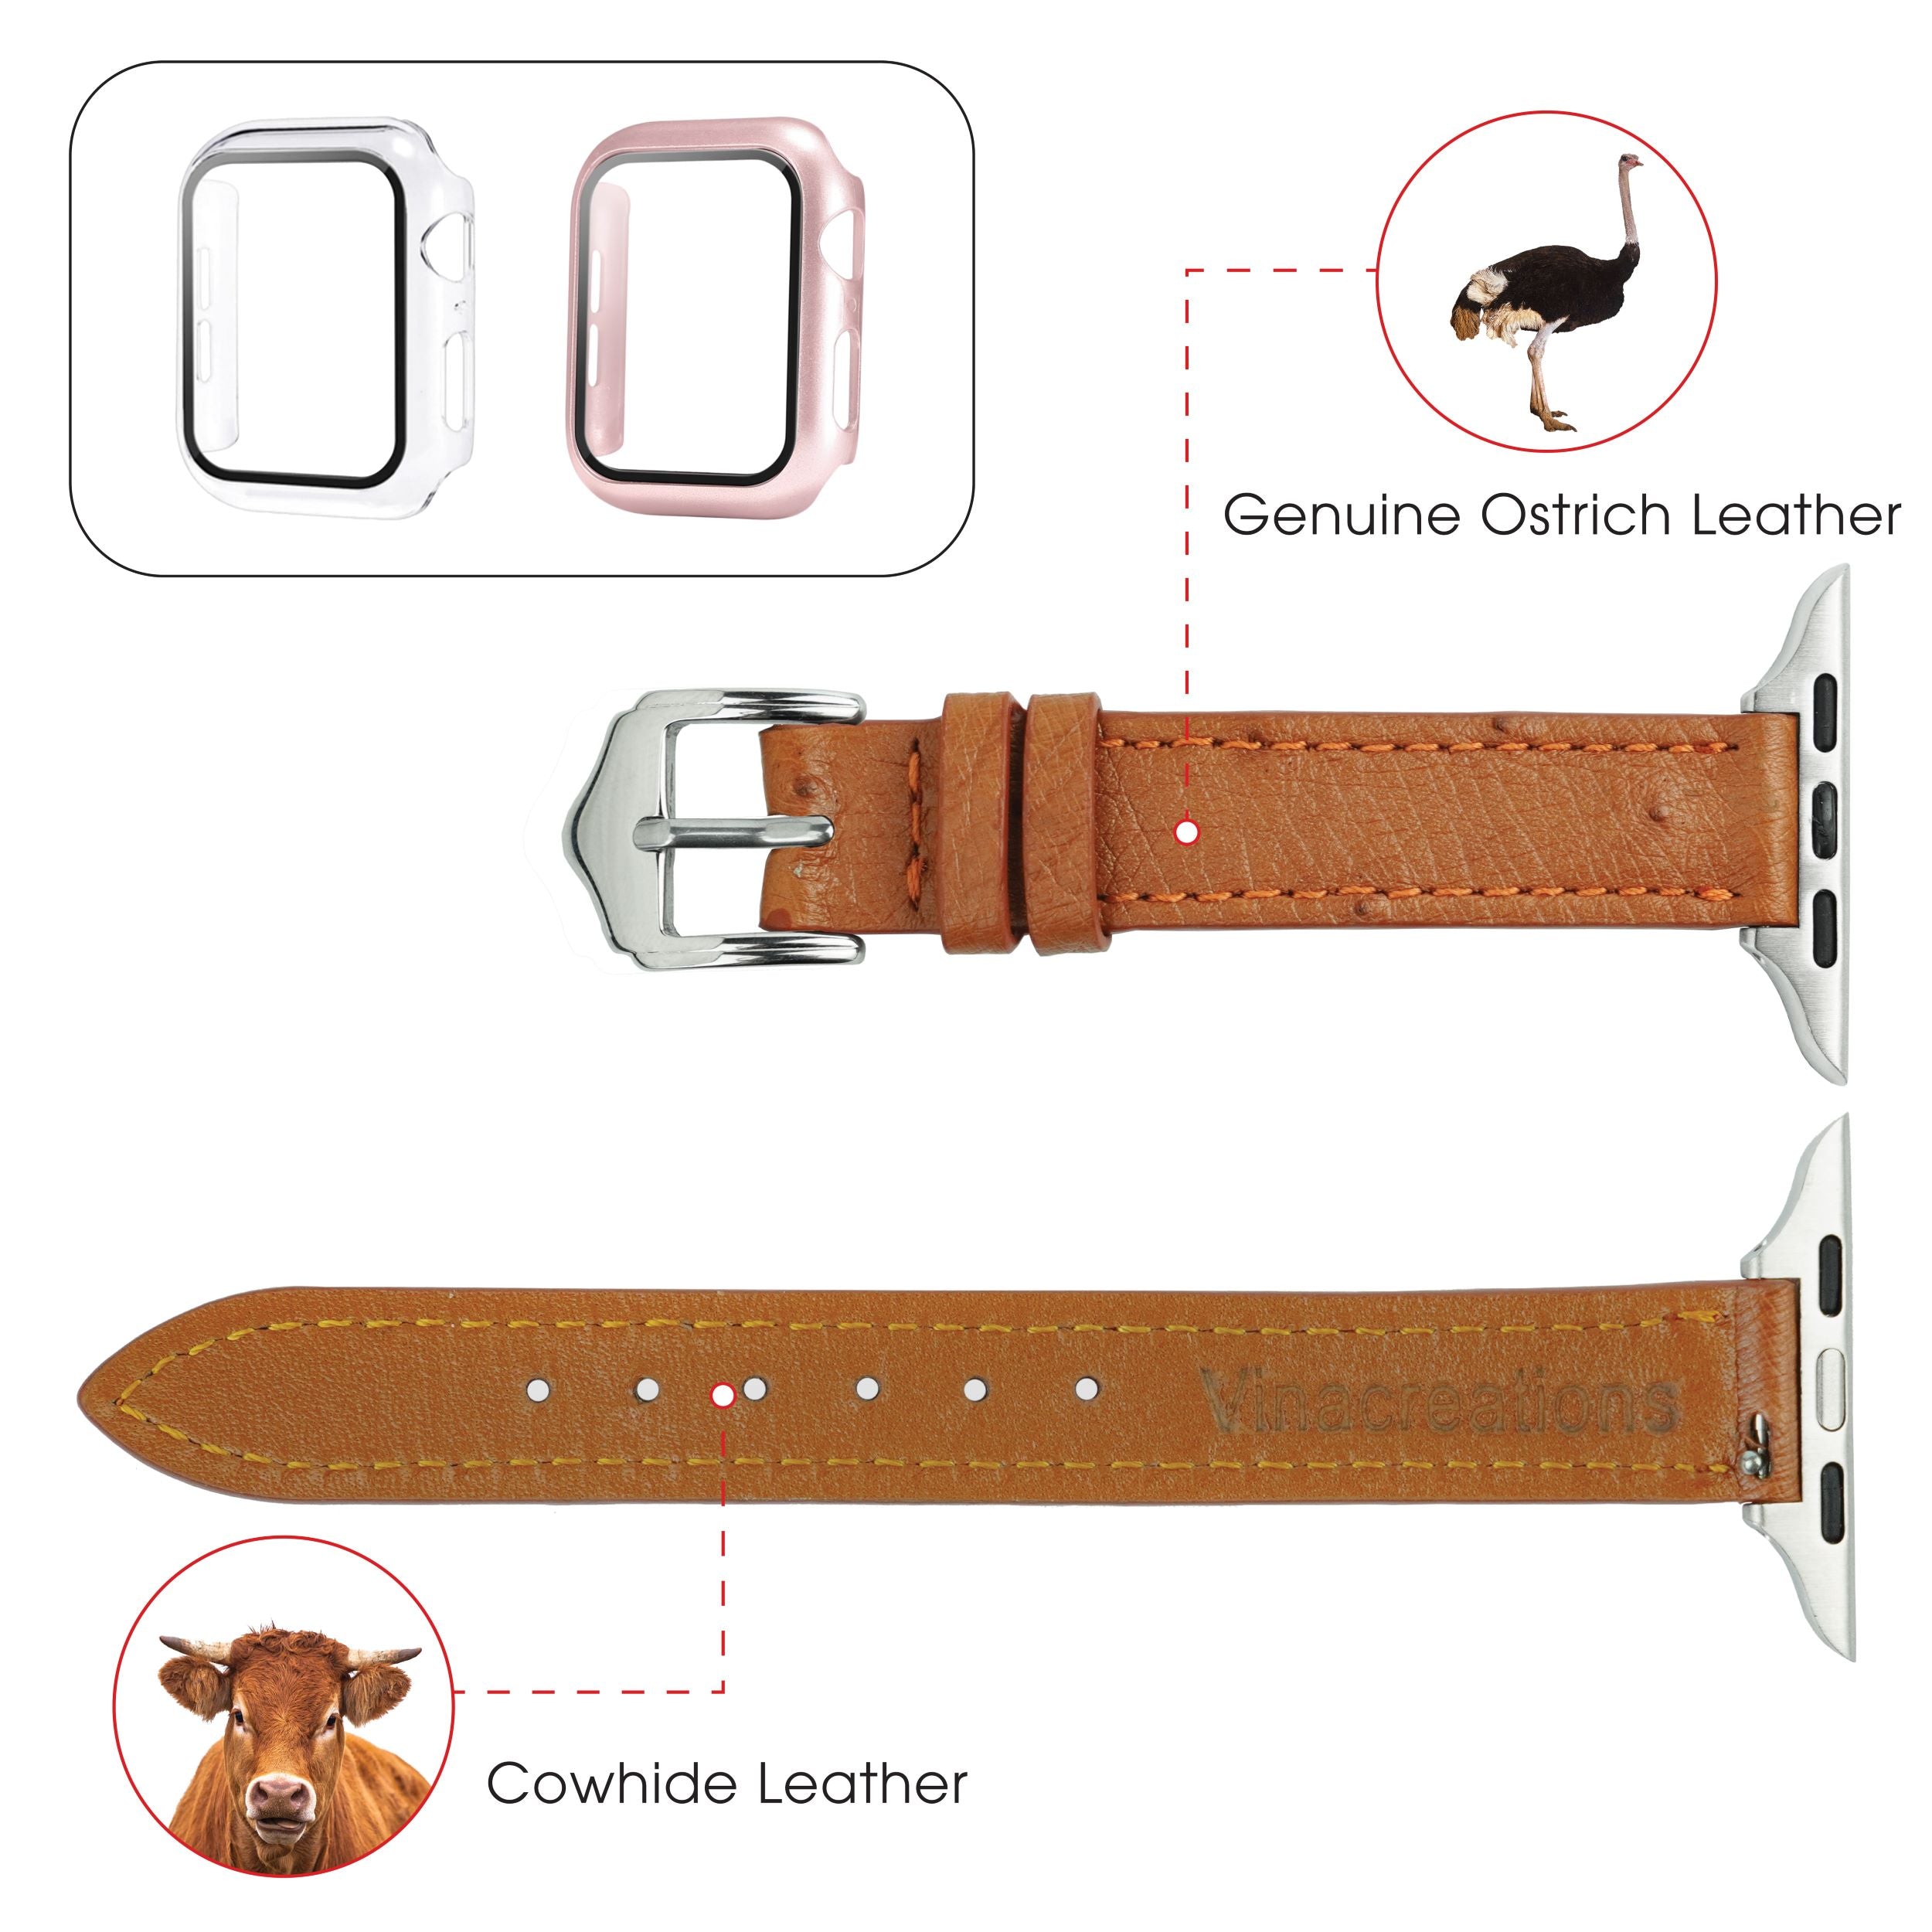 Light Brown Flat Ostrich Leather Band Compatible Apple Watch Iwatch 42mm Screen Protector Case Silver Adapter Replacement Strap For Smartwatch Series 1 2 3 Leather Handmade AW-186S-W-42MM